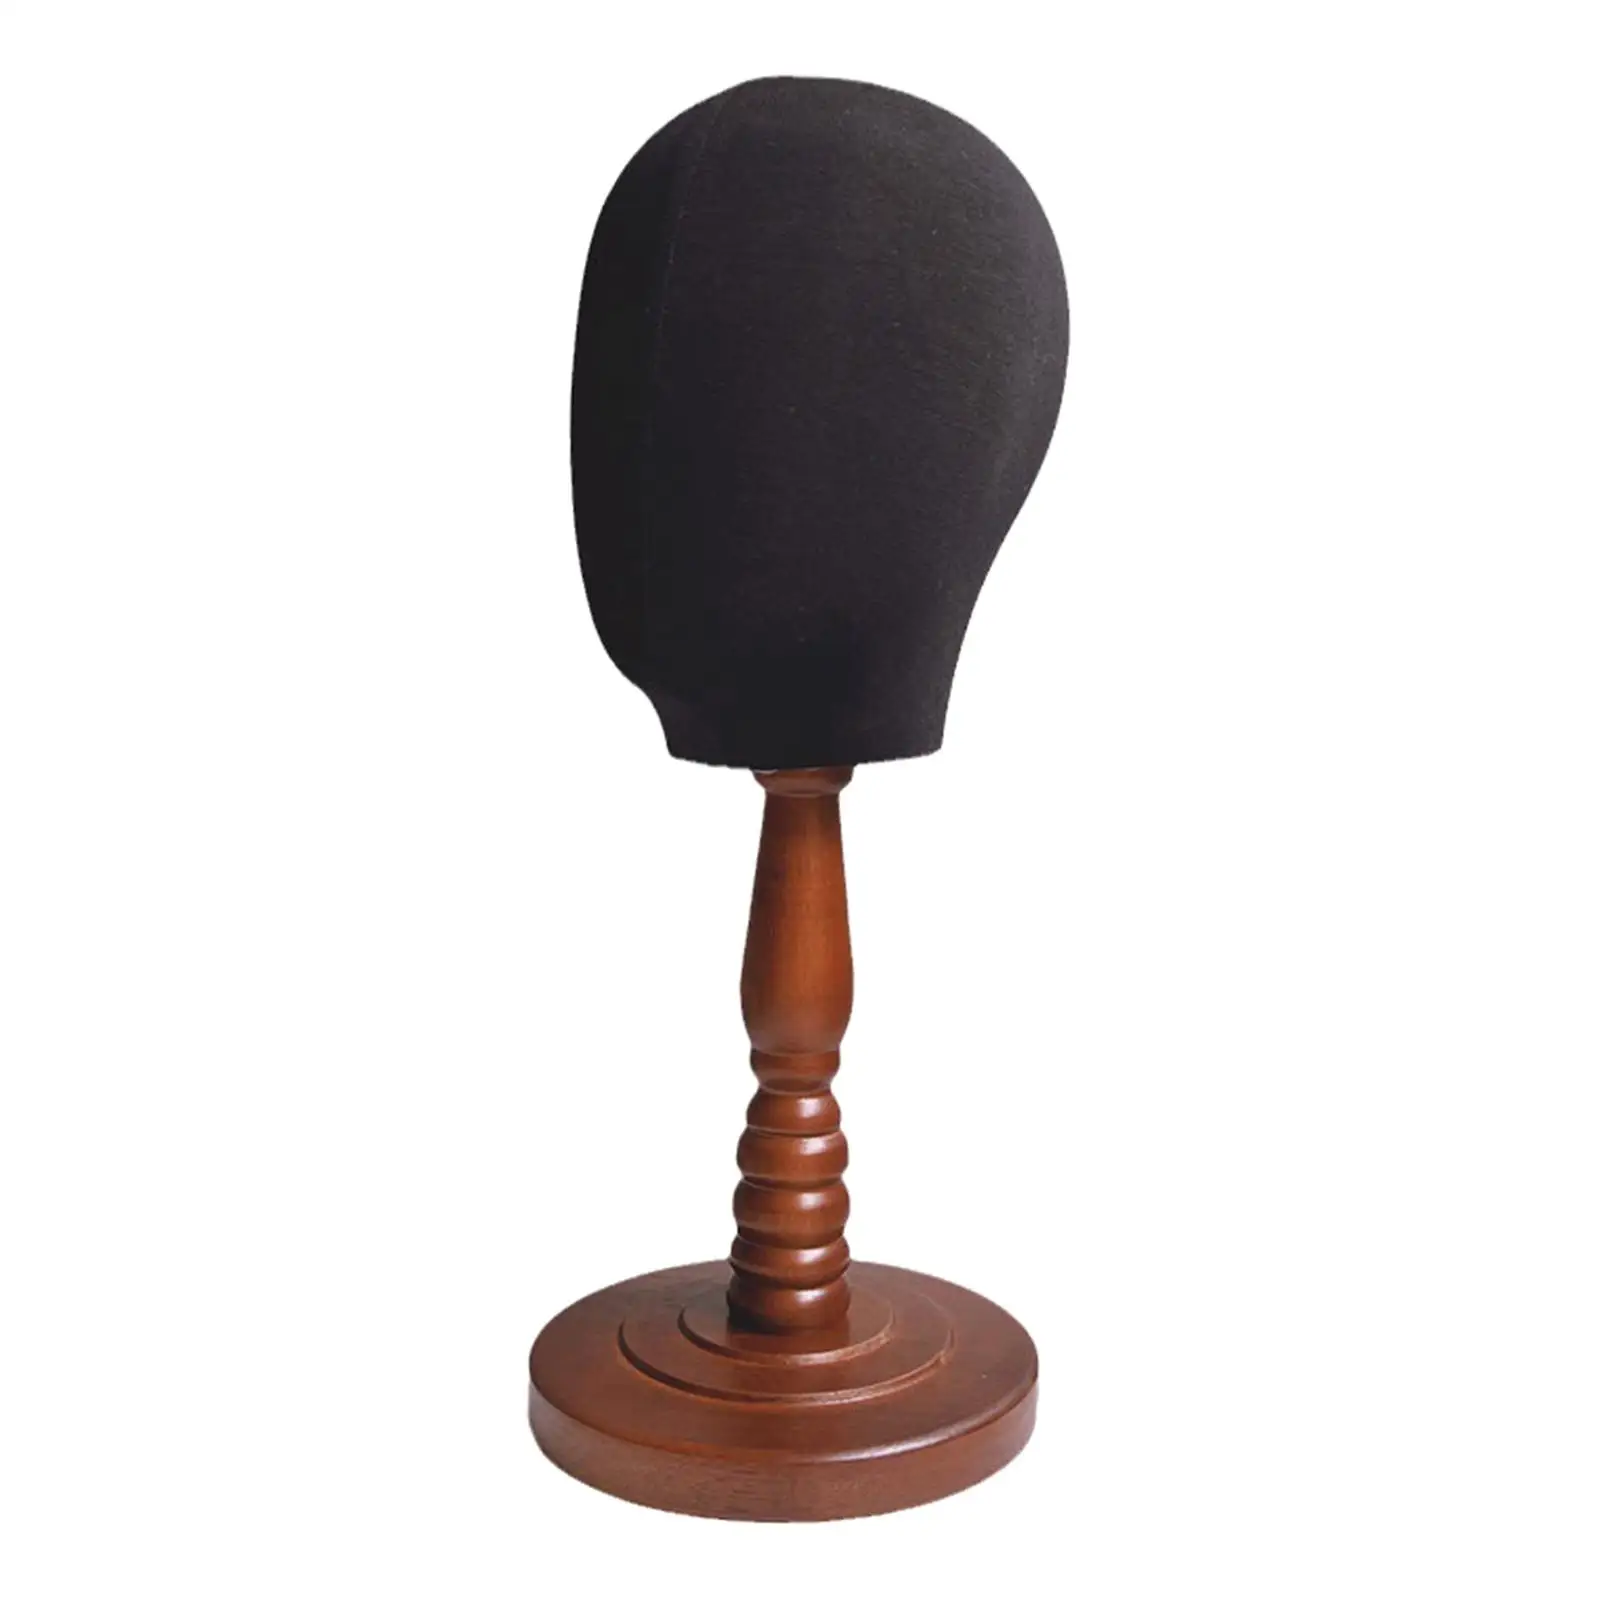 Adult Mannequin Head Wigs Rack Wig Stand Holder for Salon Shopping Mall Shop